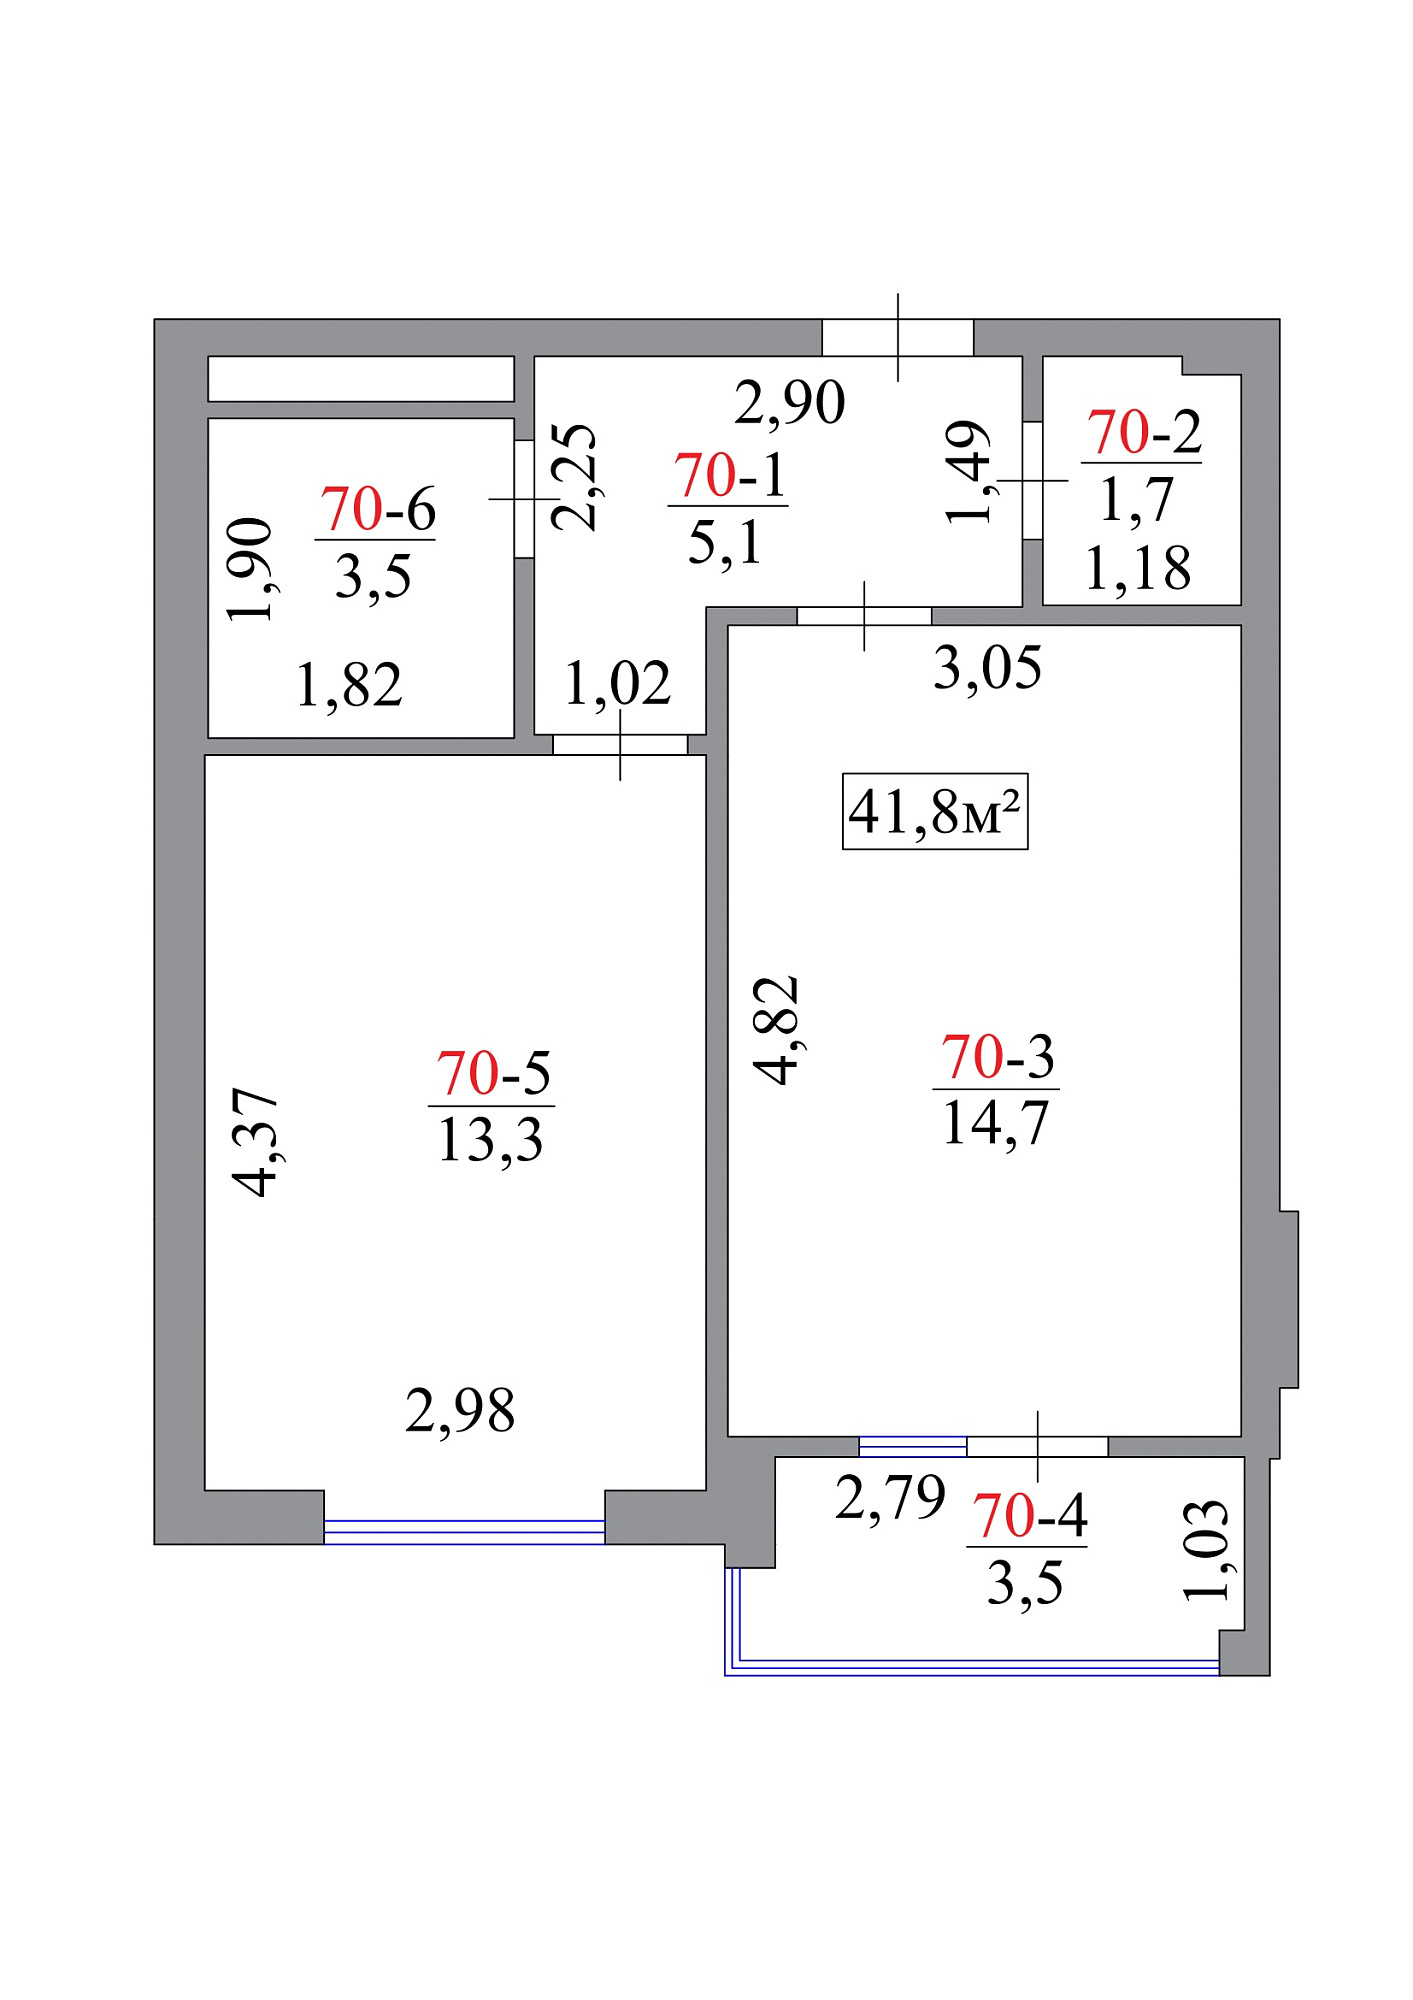 Planning 1-rm flats area 41.8m2, AB-07-07/00063.